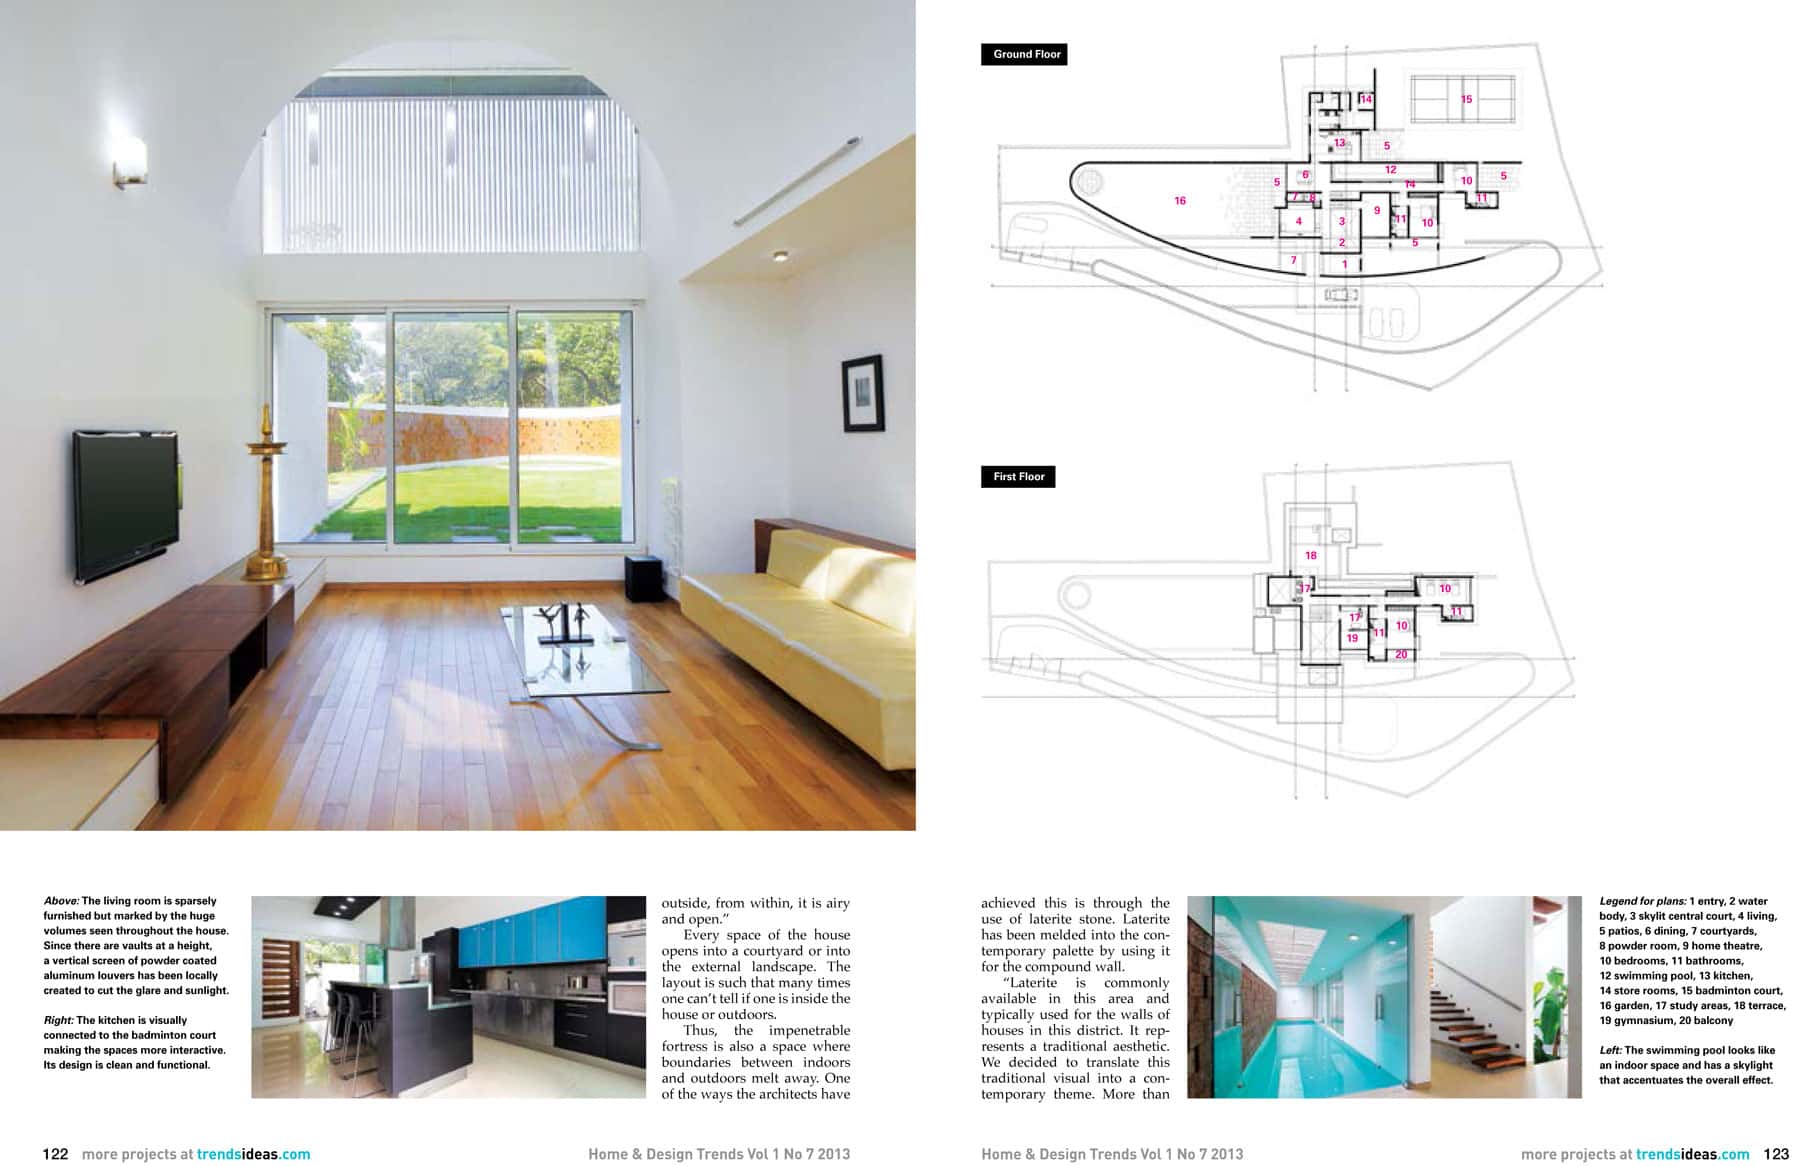 trends-magazine-india-features-the-running-wall-residence-2